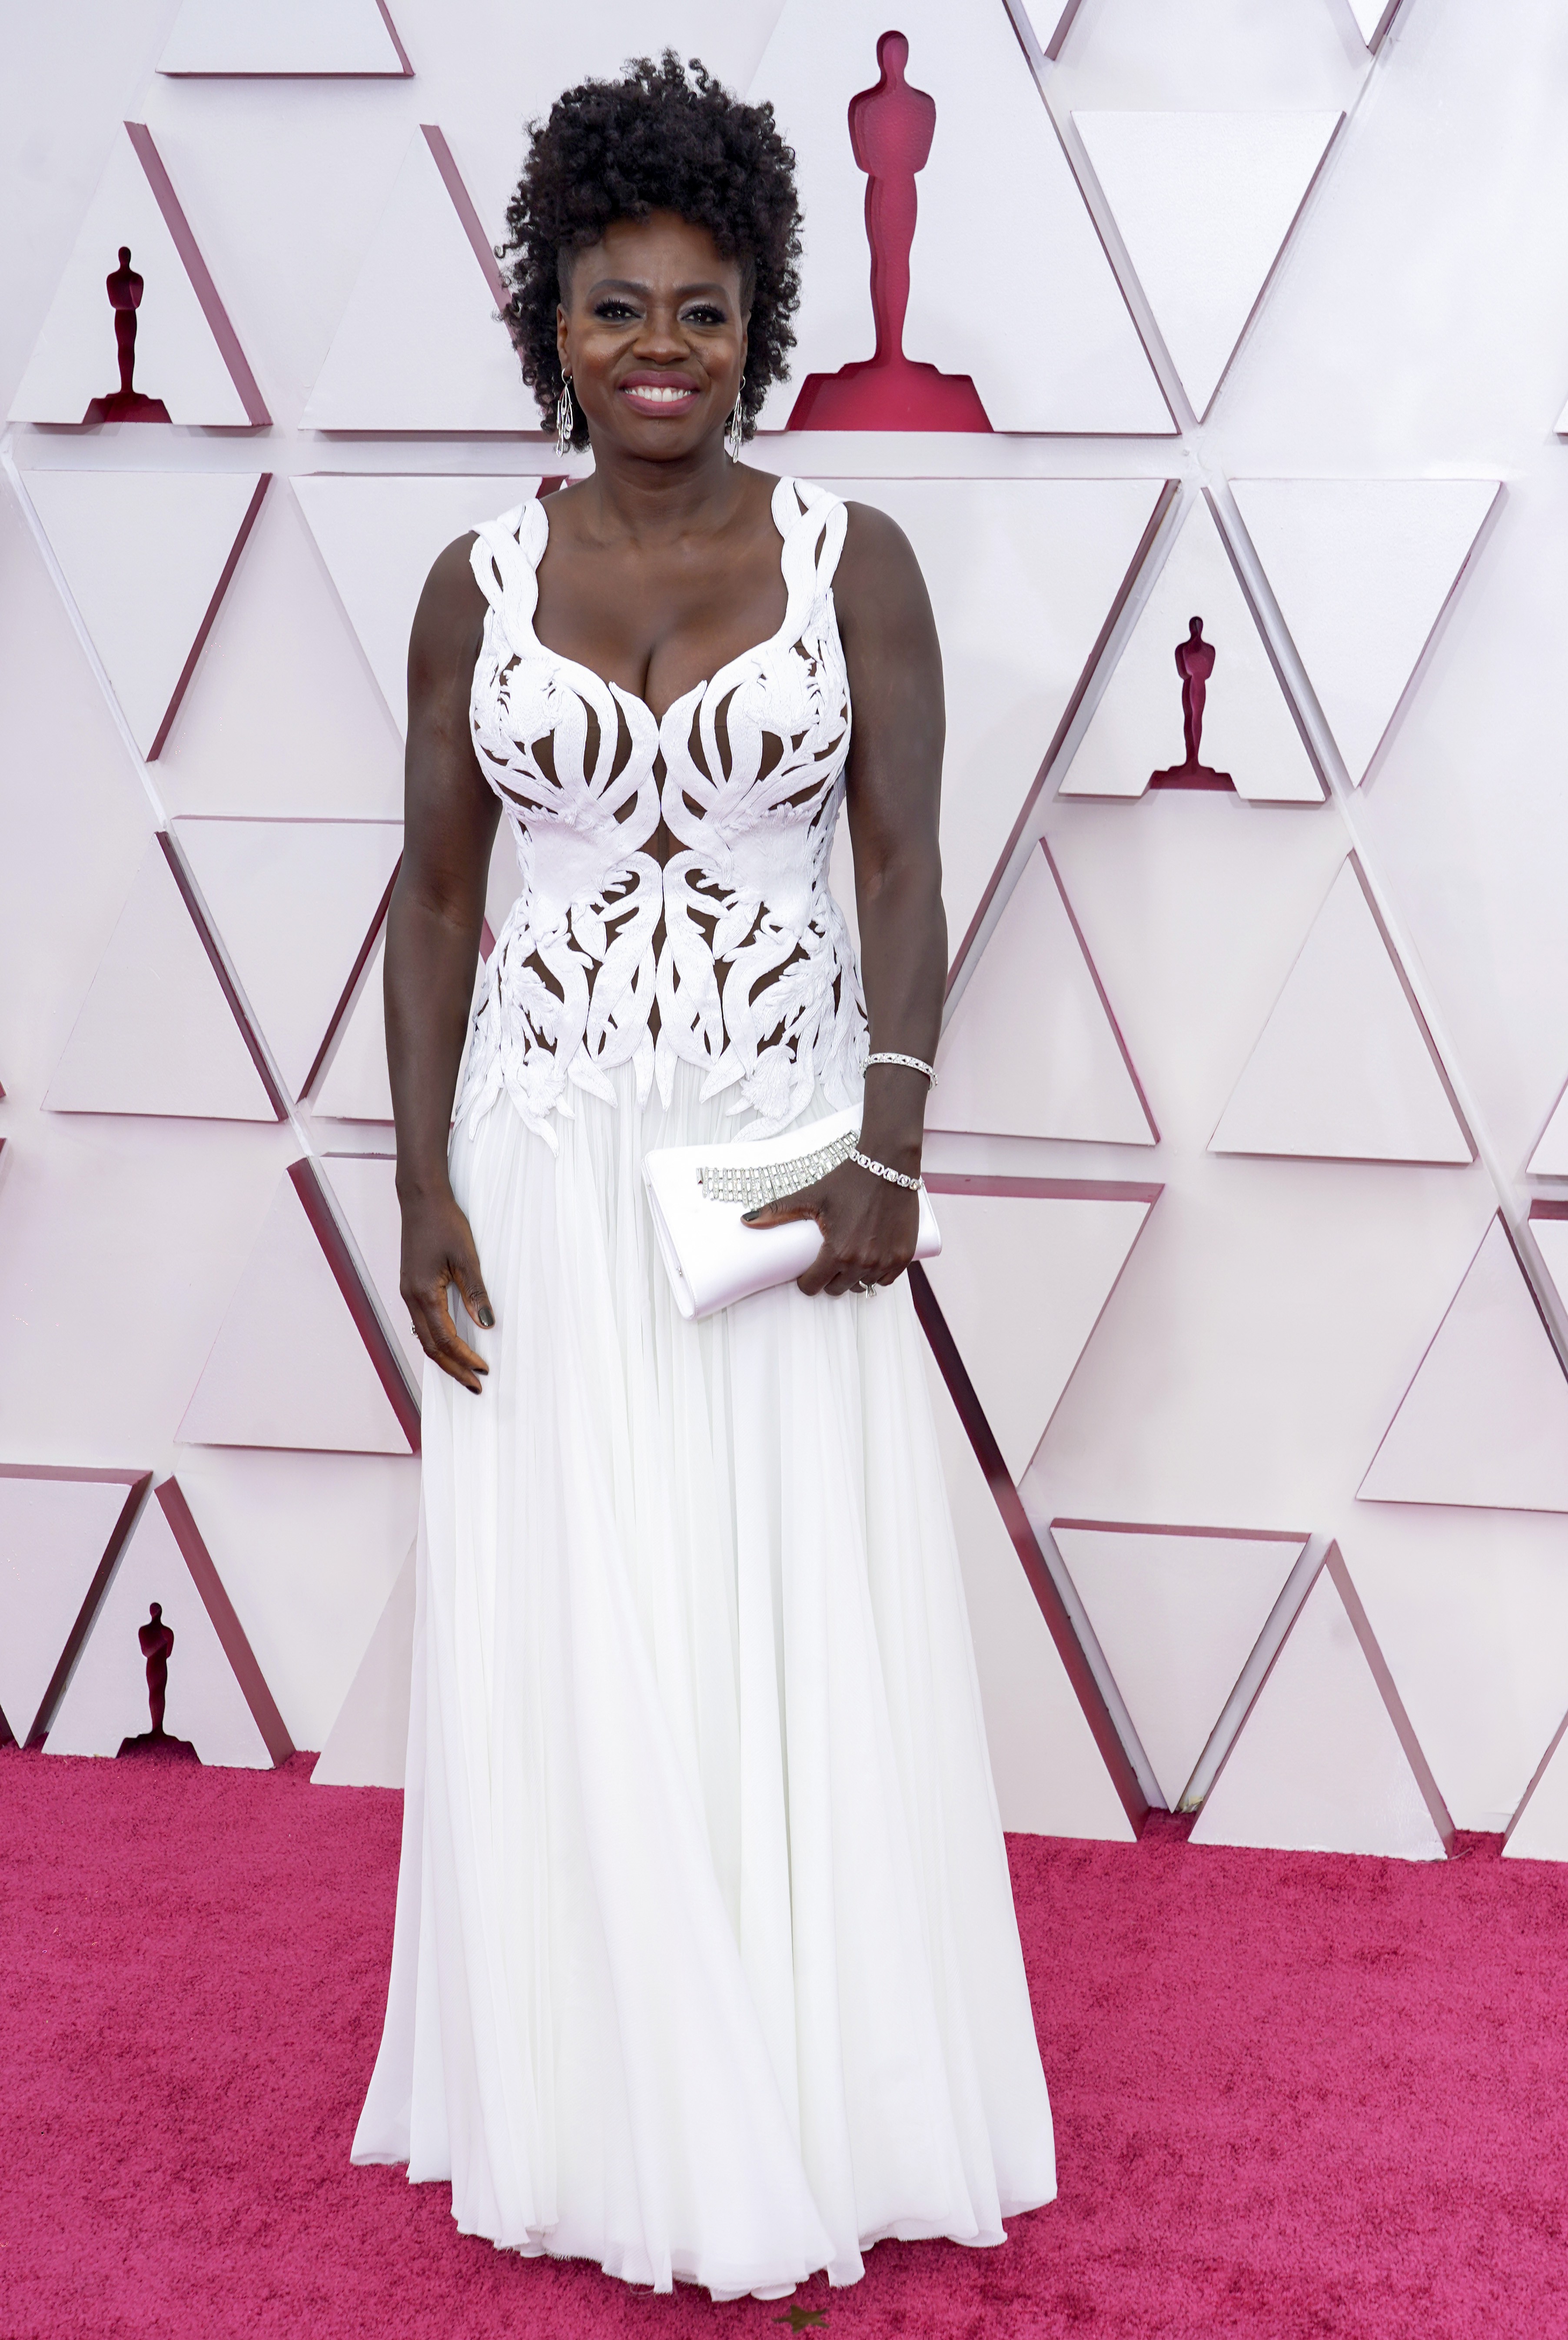 LOS ANGELES, CALIFORNIA – APRIL 25: Viola Davis attends the 93rd Annual Academy Awards at Union Station on April 25, 2021 in Los Angeles, California. (Photo by Chris Pizzelo-Pool/Getty Images) (Foto: Getty Images)